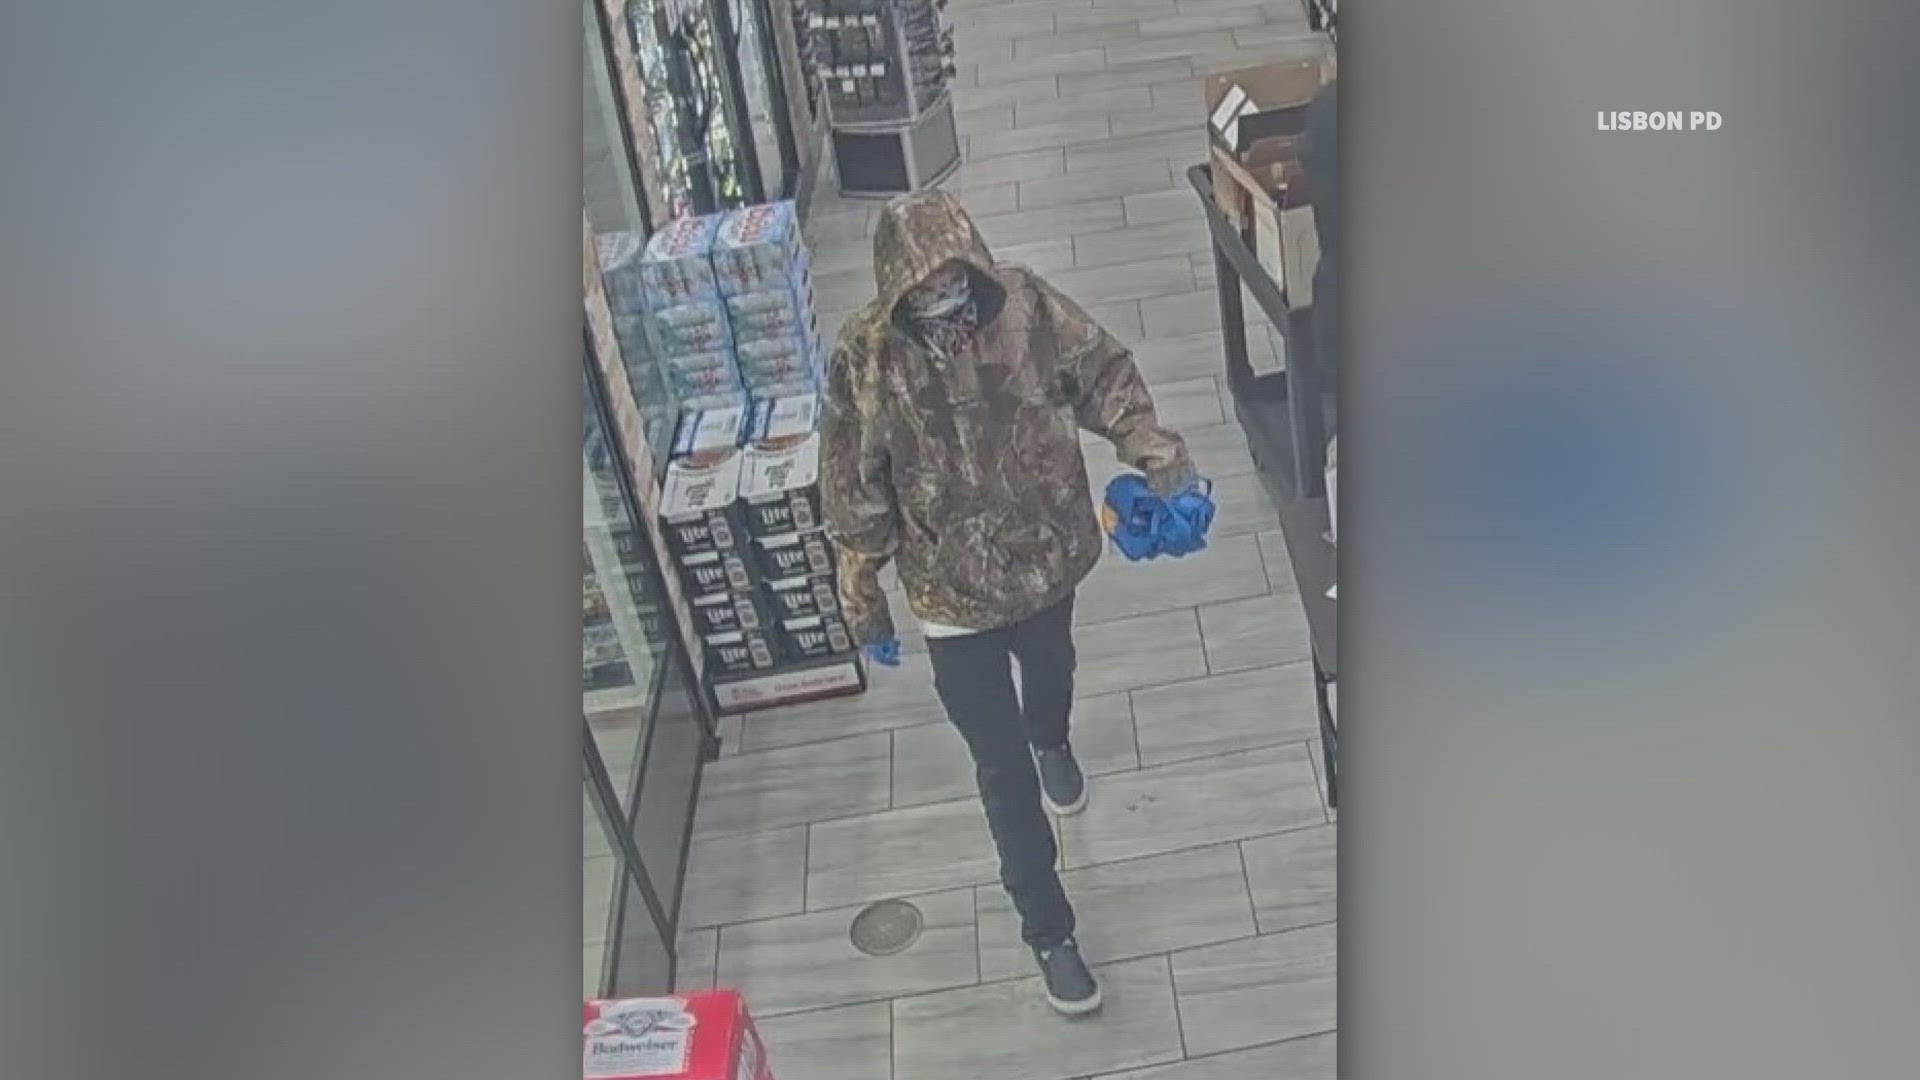 A male subject fled the store with an undisclosed amount of money, police said.